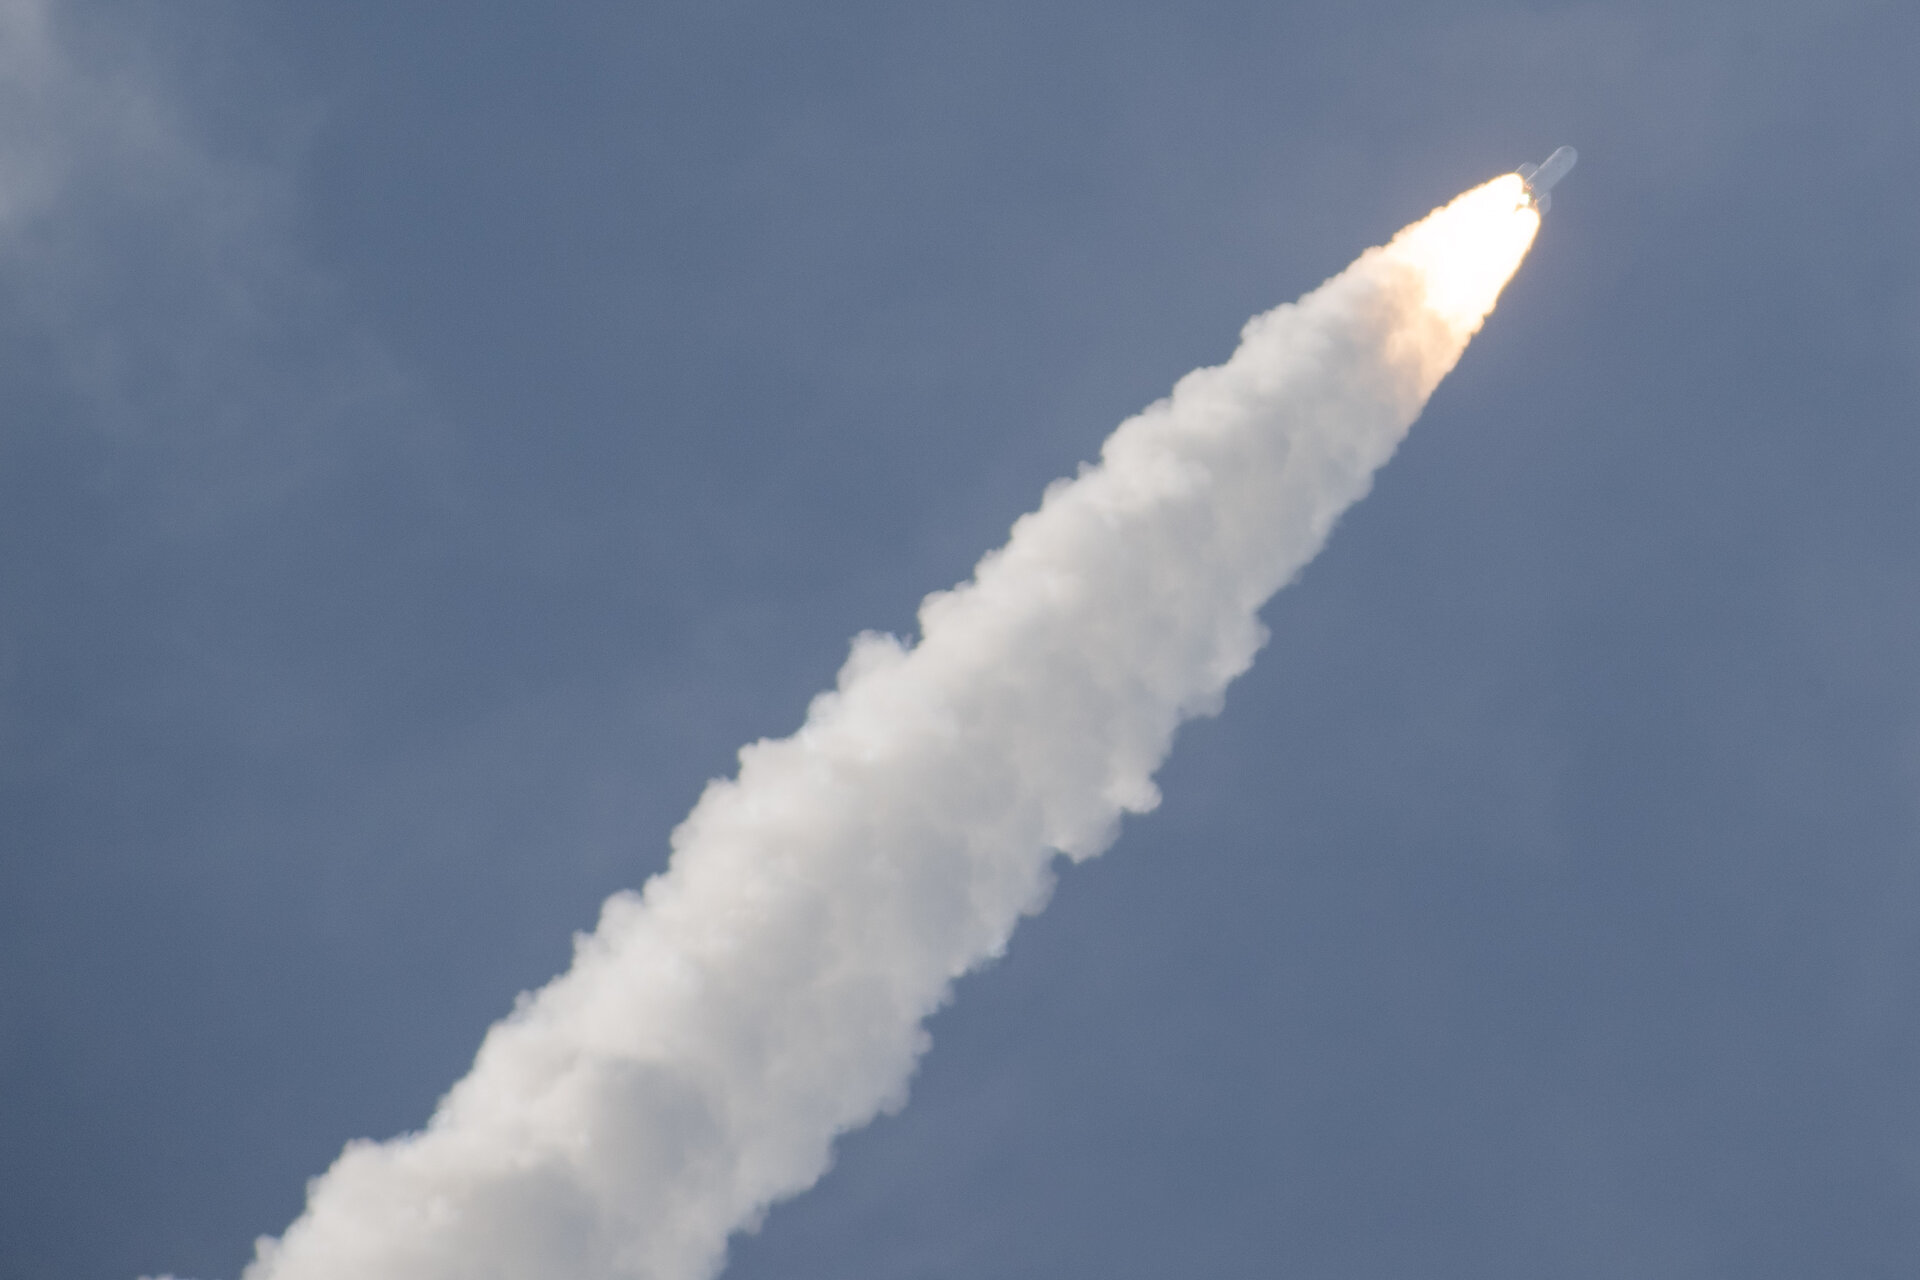 Europe's new Ariane 6 rocket powers into space